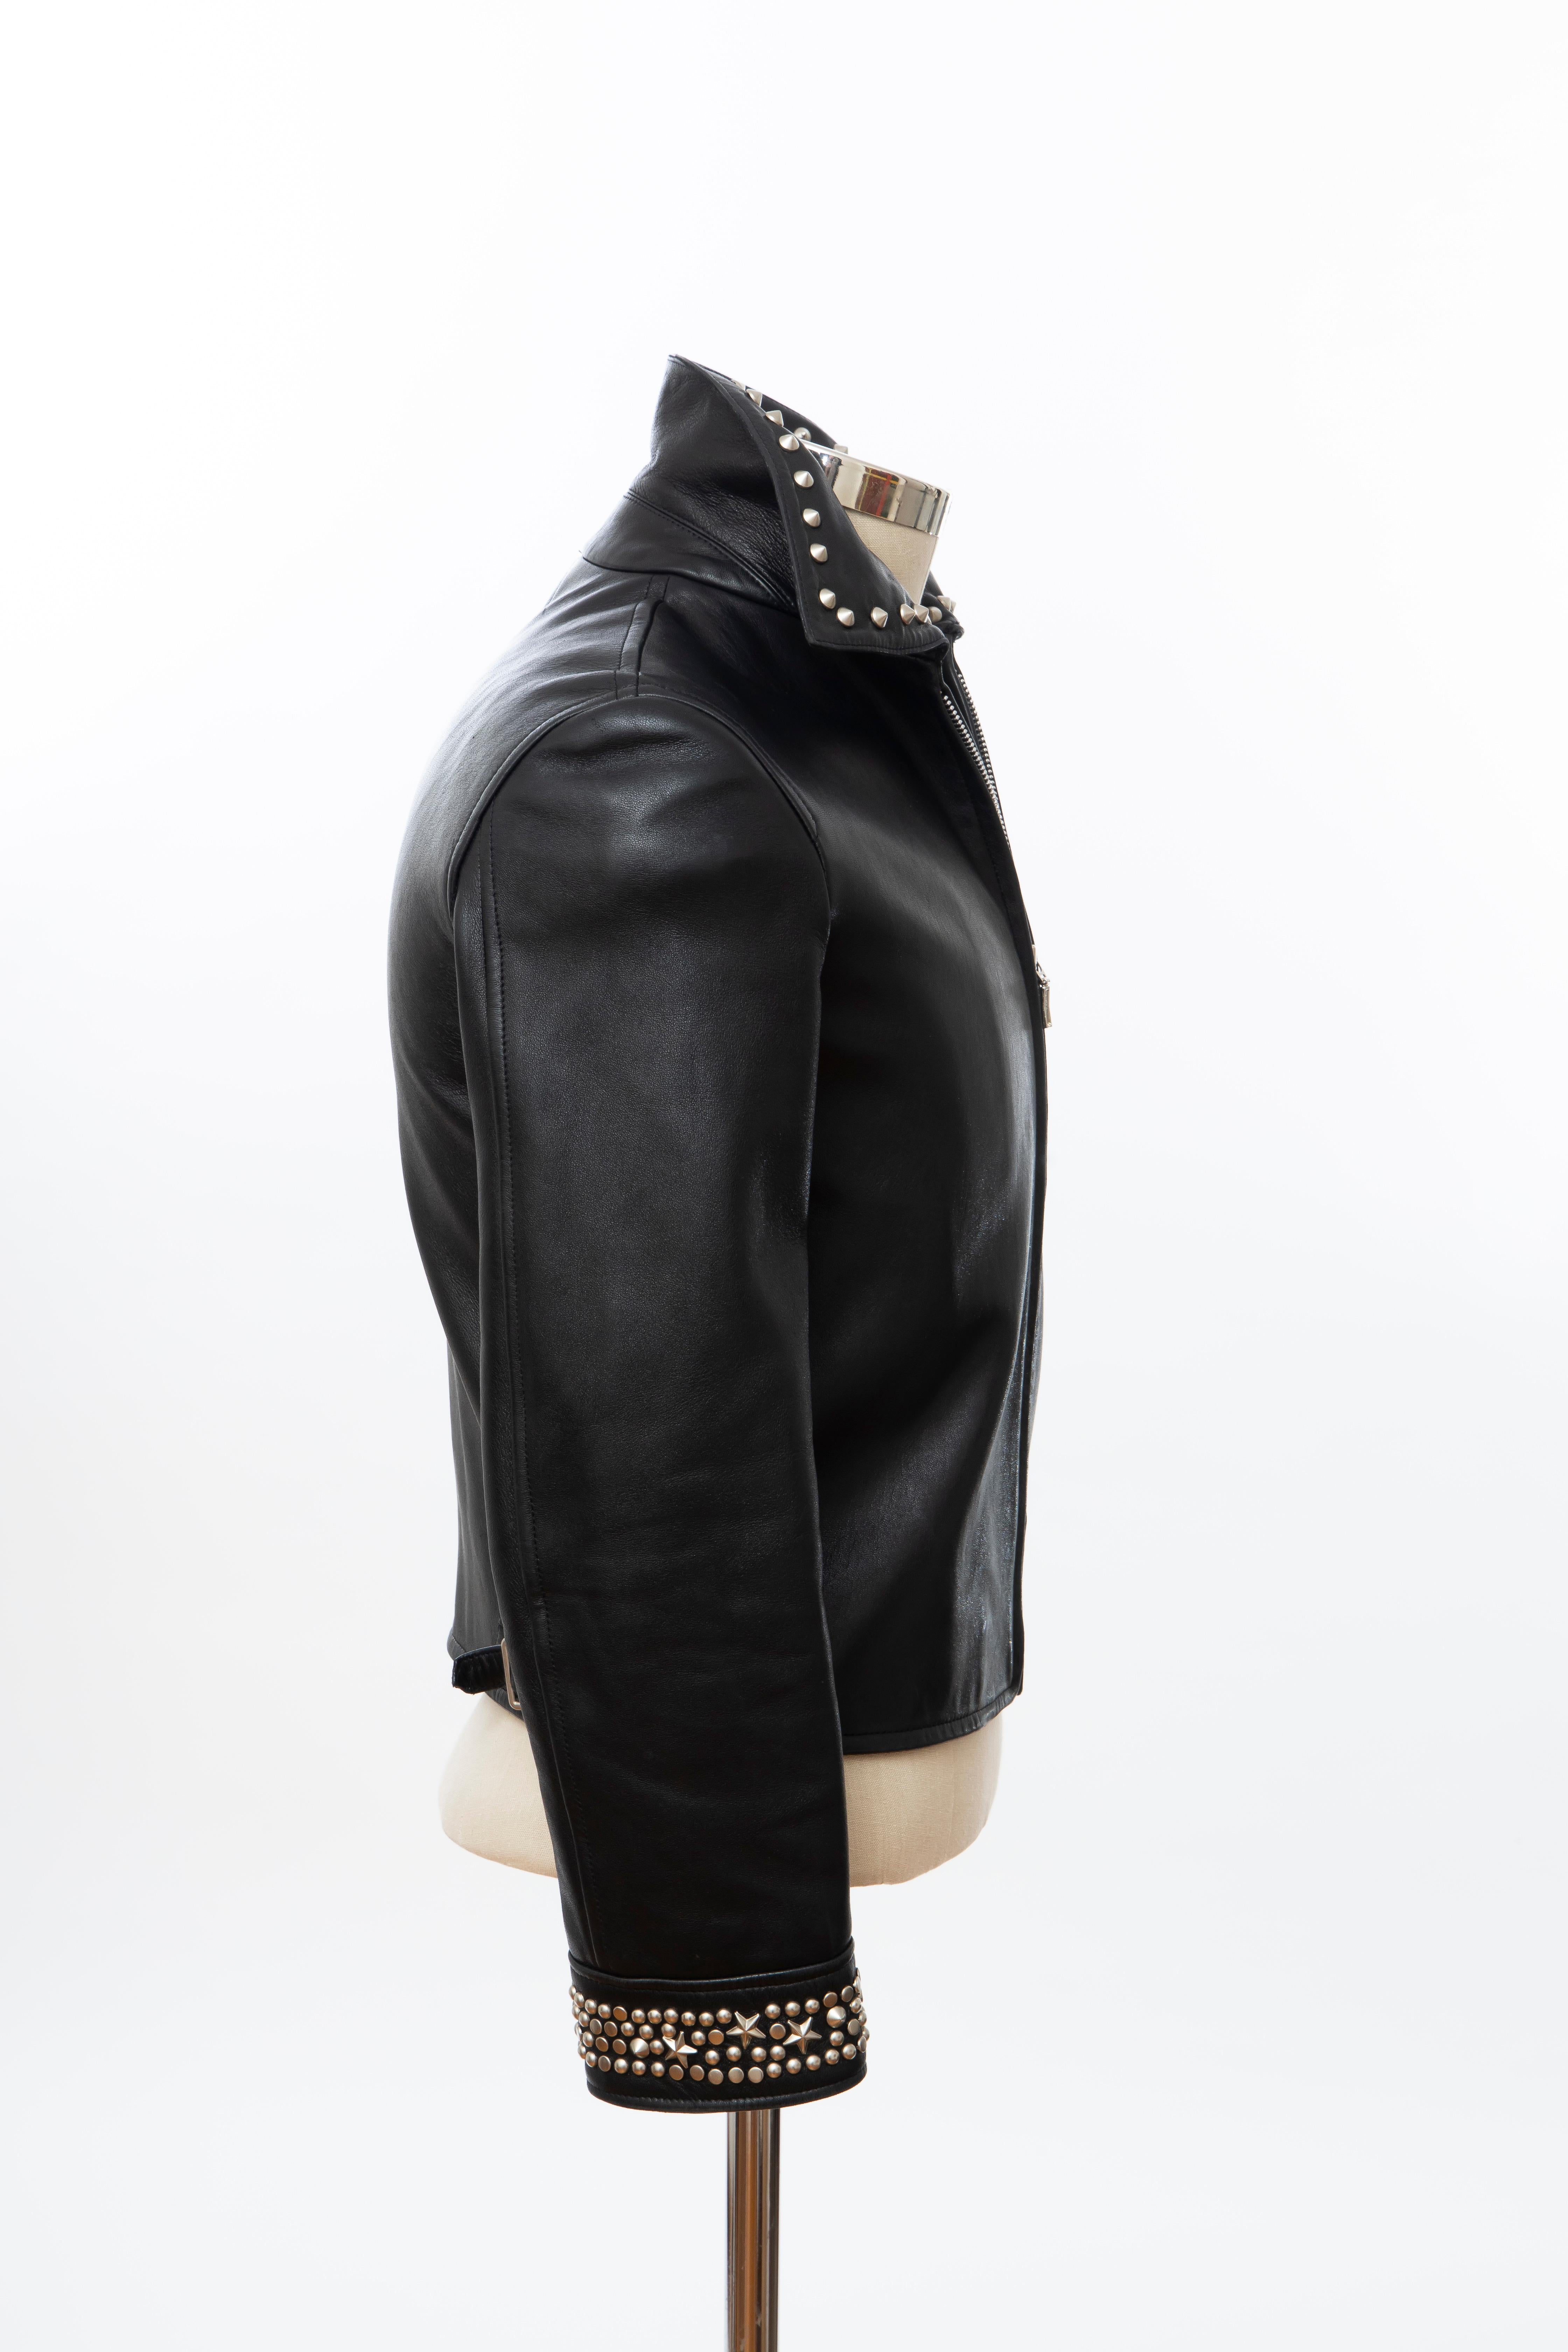 Women's Gianni Versace Black Leather Jacket Pewter Stud Collar & Cuffs,  Circa: 1990's For Sale